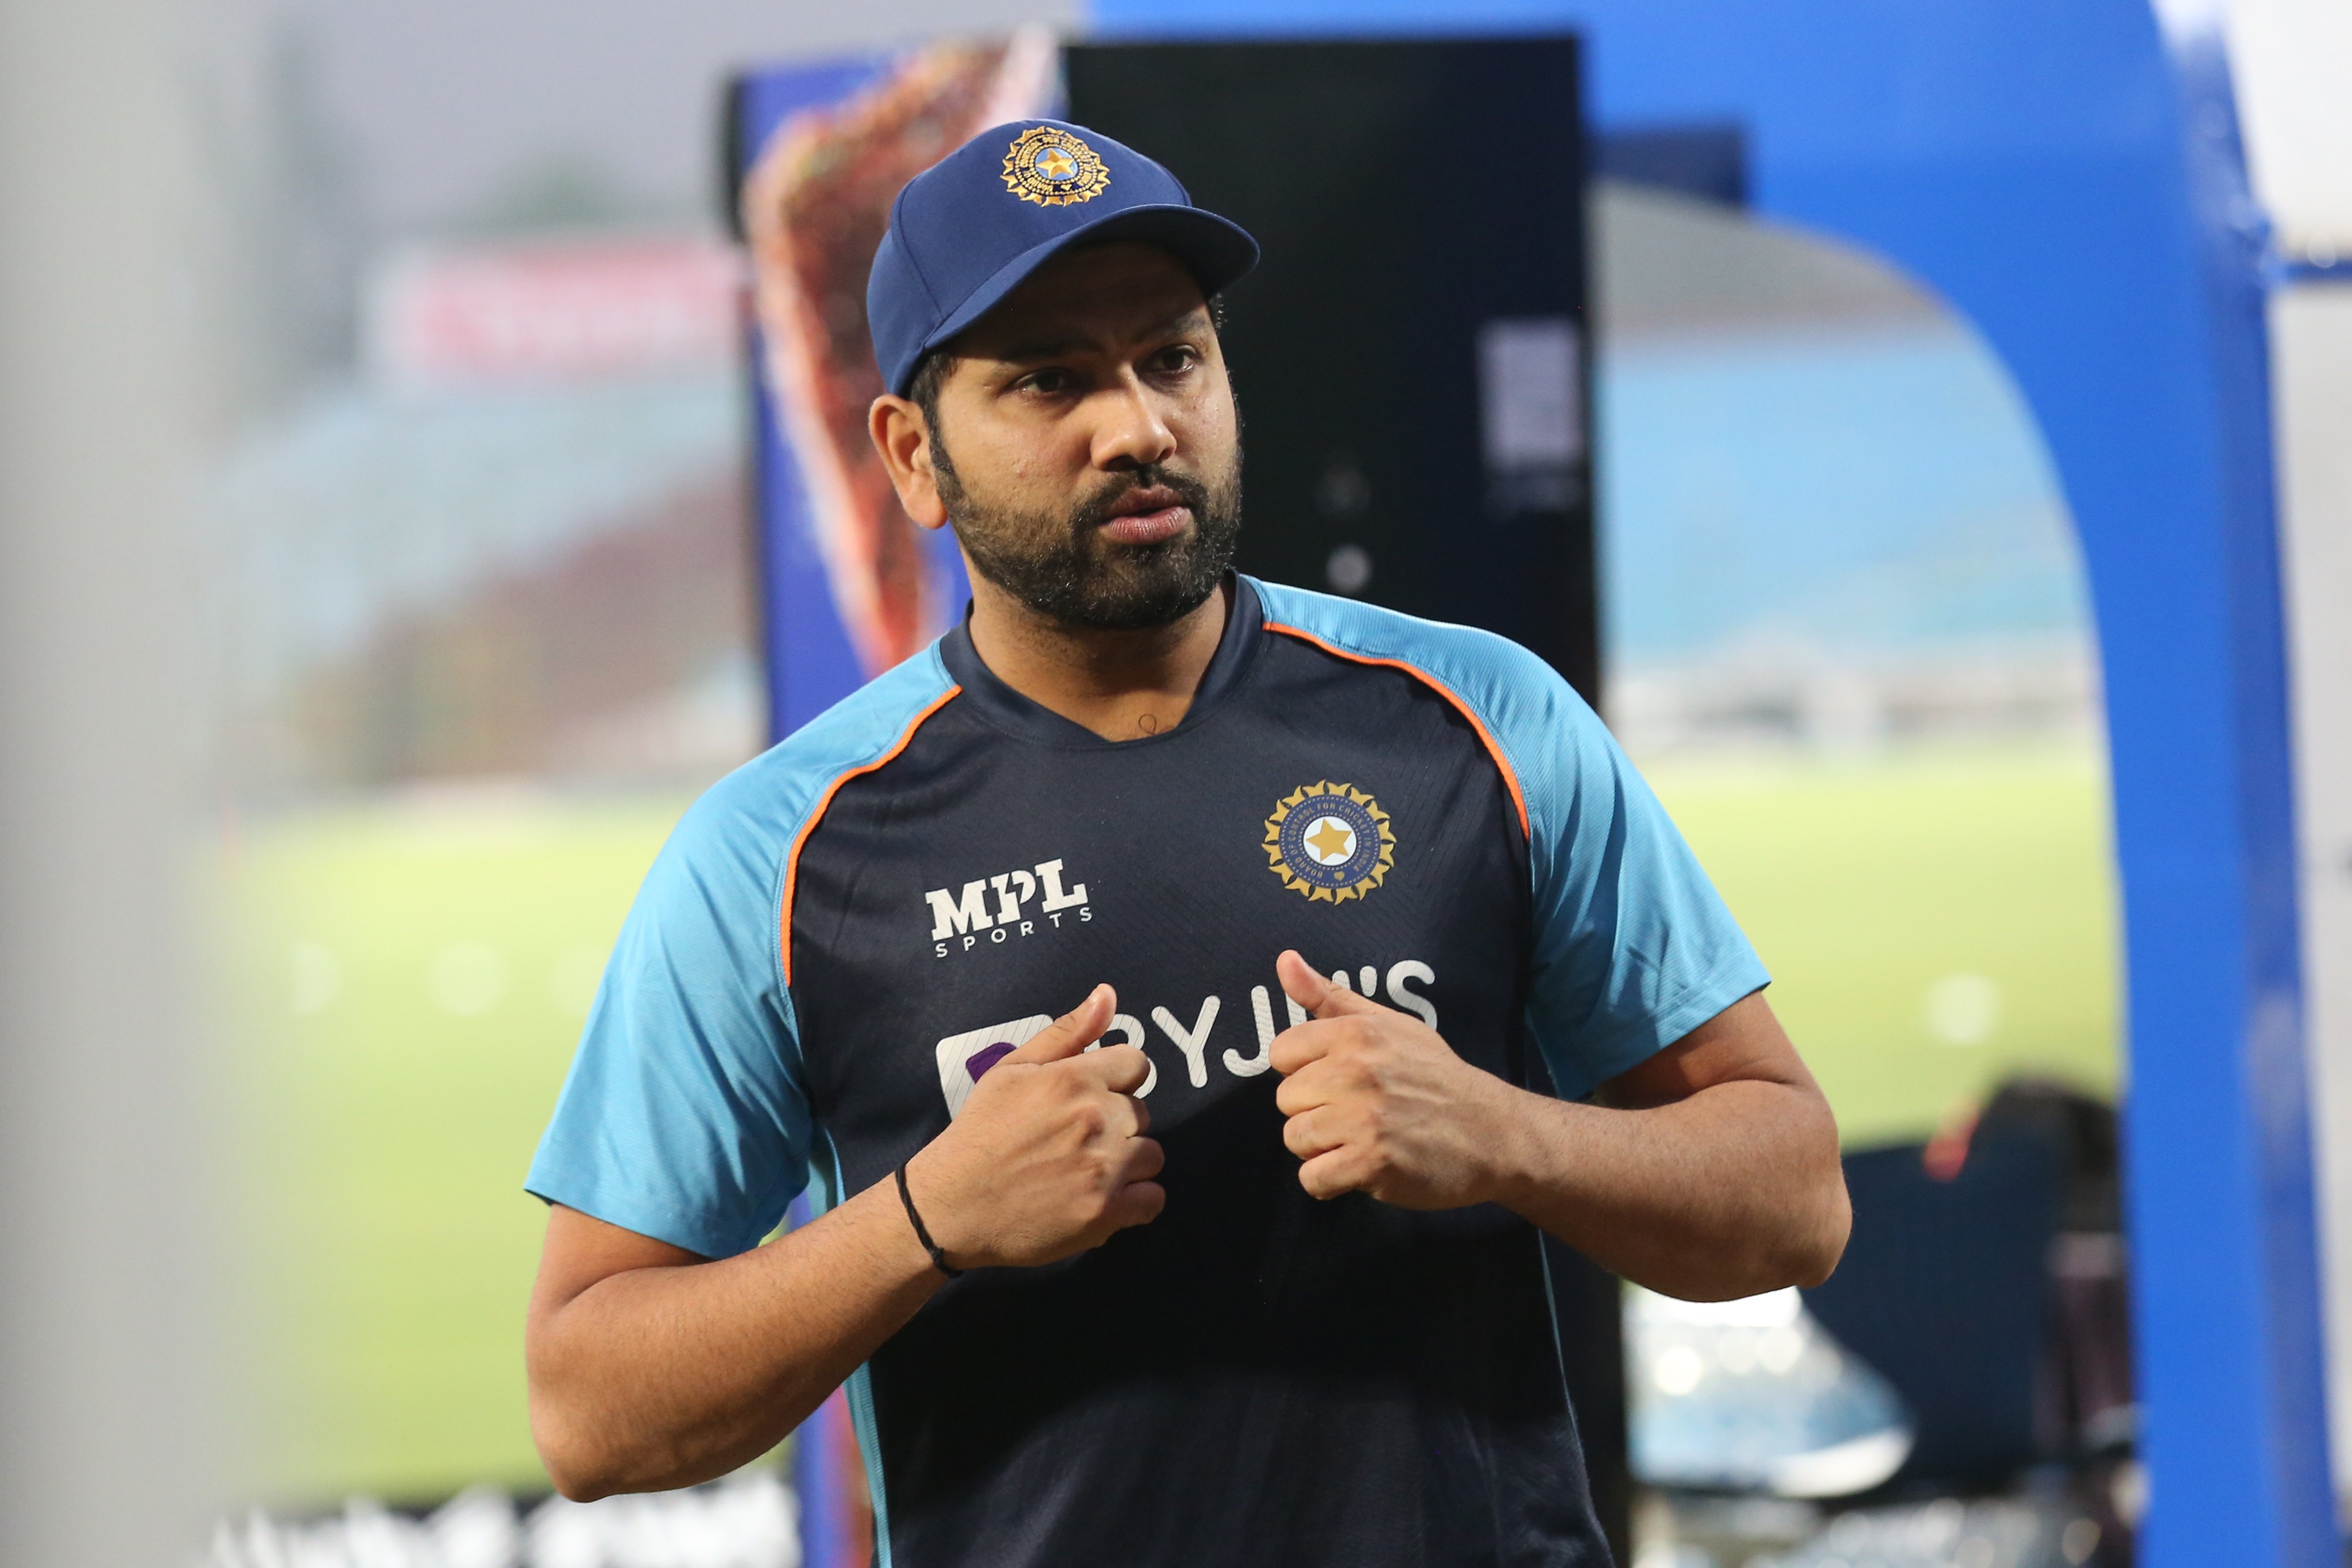 Players are not machines, says Indian T20 captain Rohit Sharma